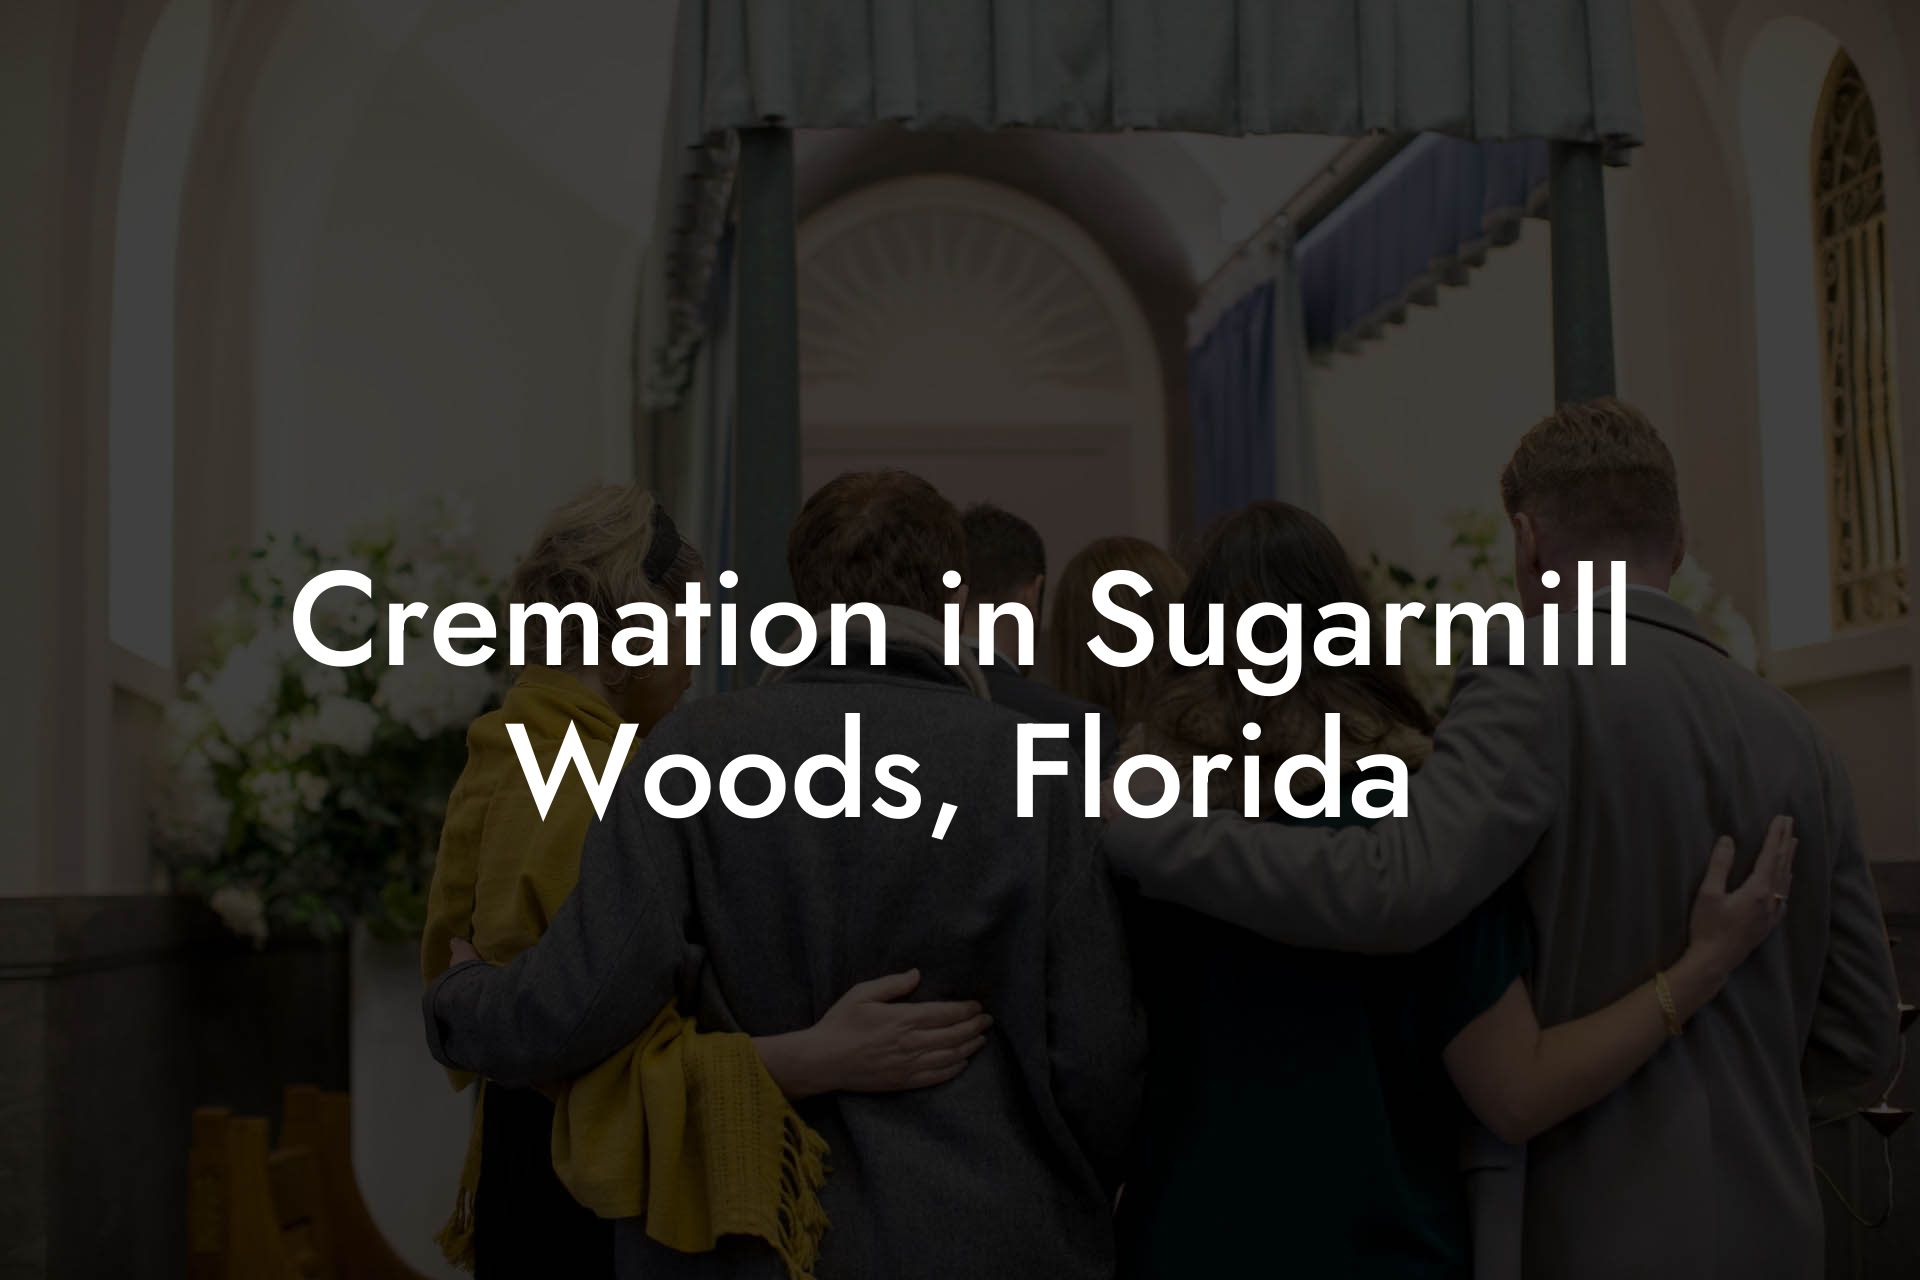 Cremation in Sugarmill Woods, Florida